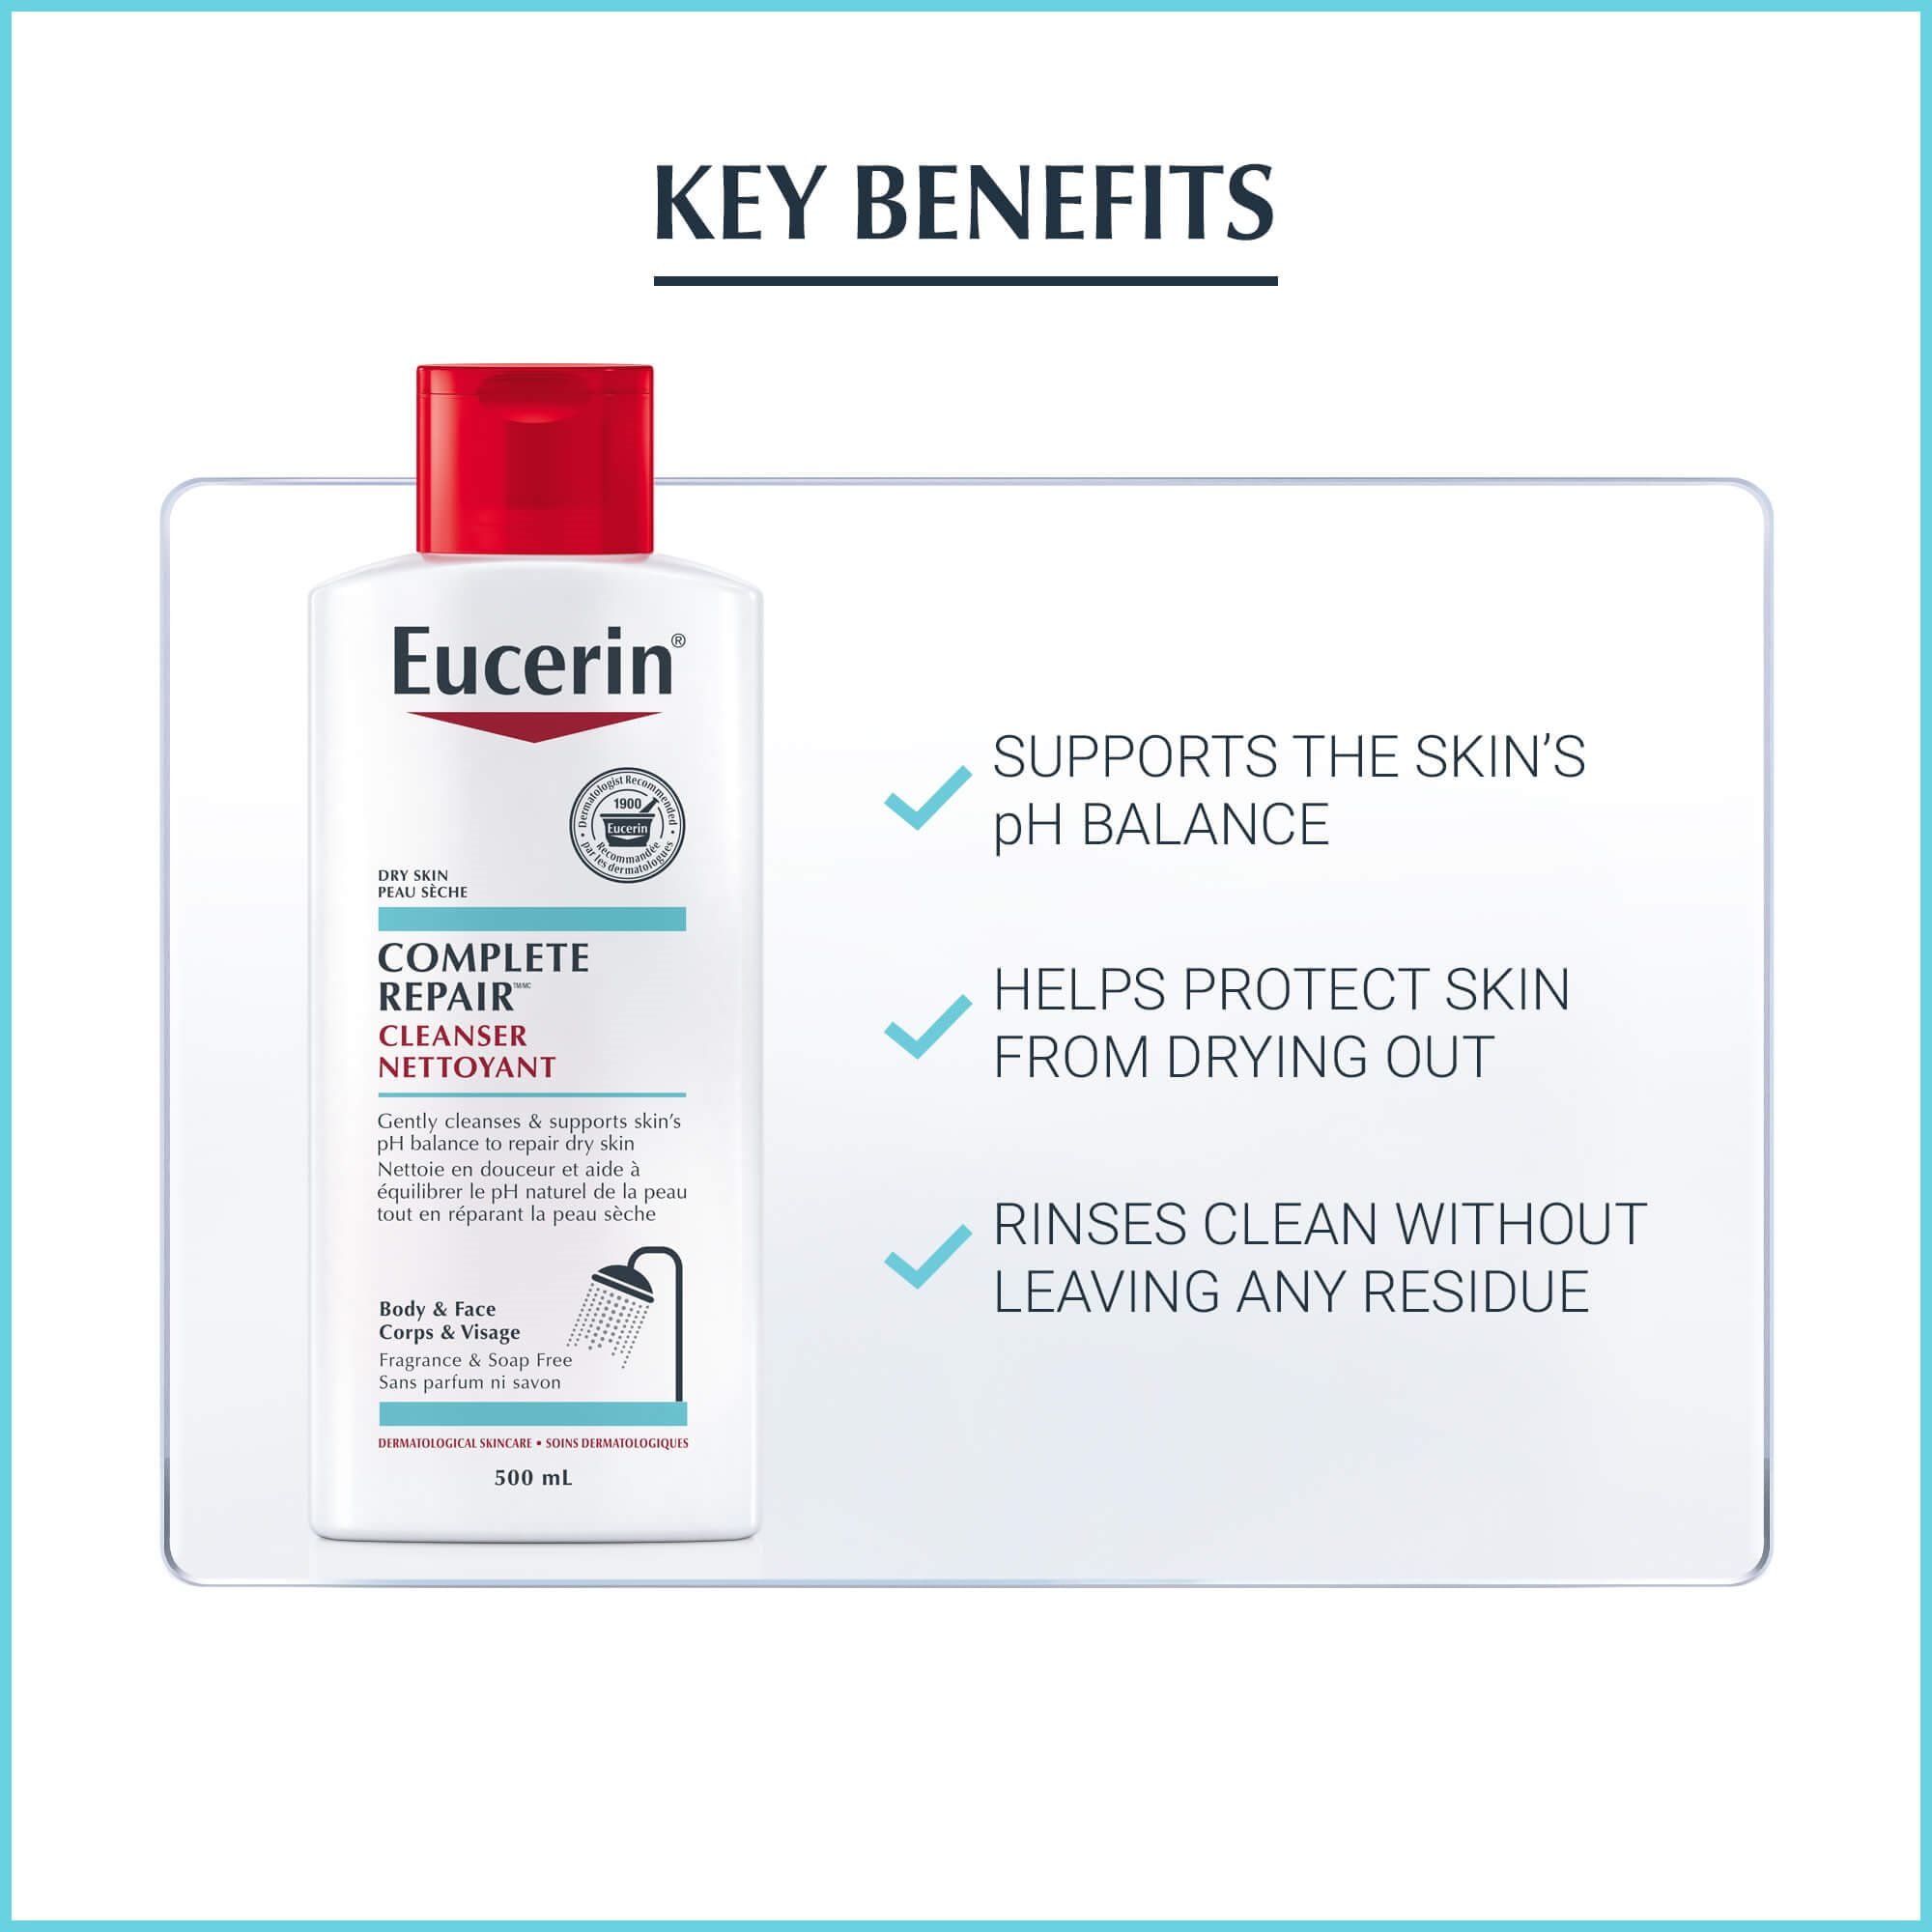 Image listing the key benefits of using Eucerin Complete Repair Cleanser.